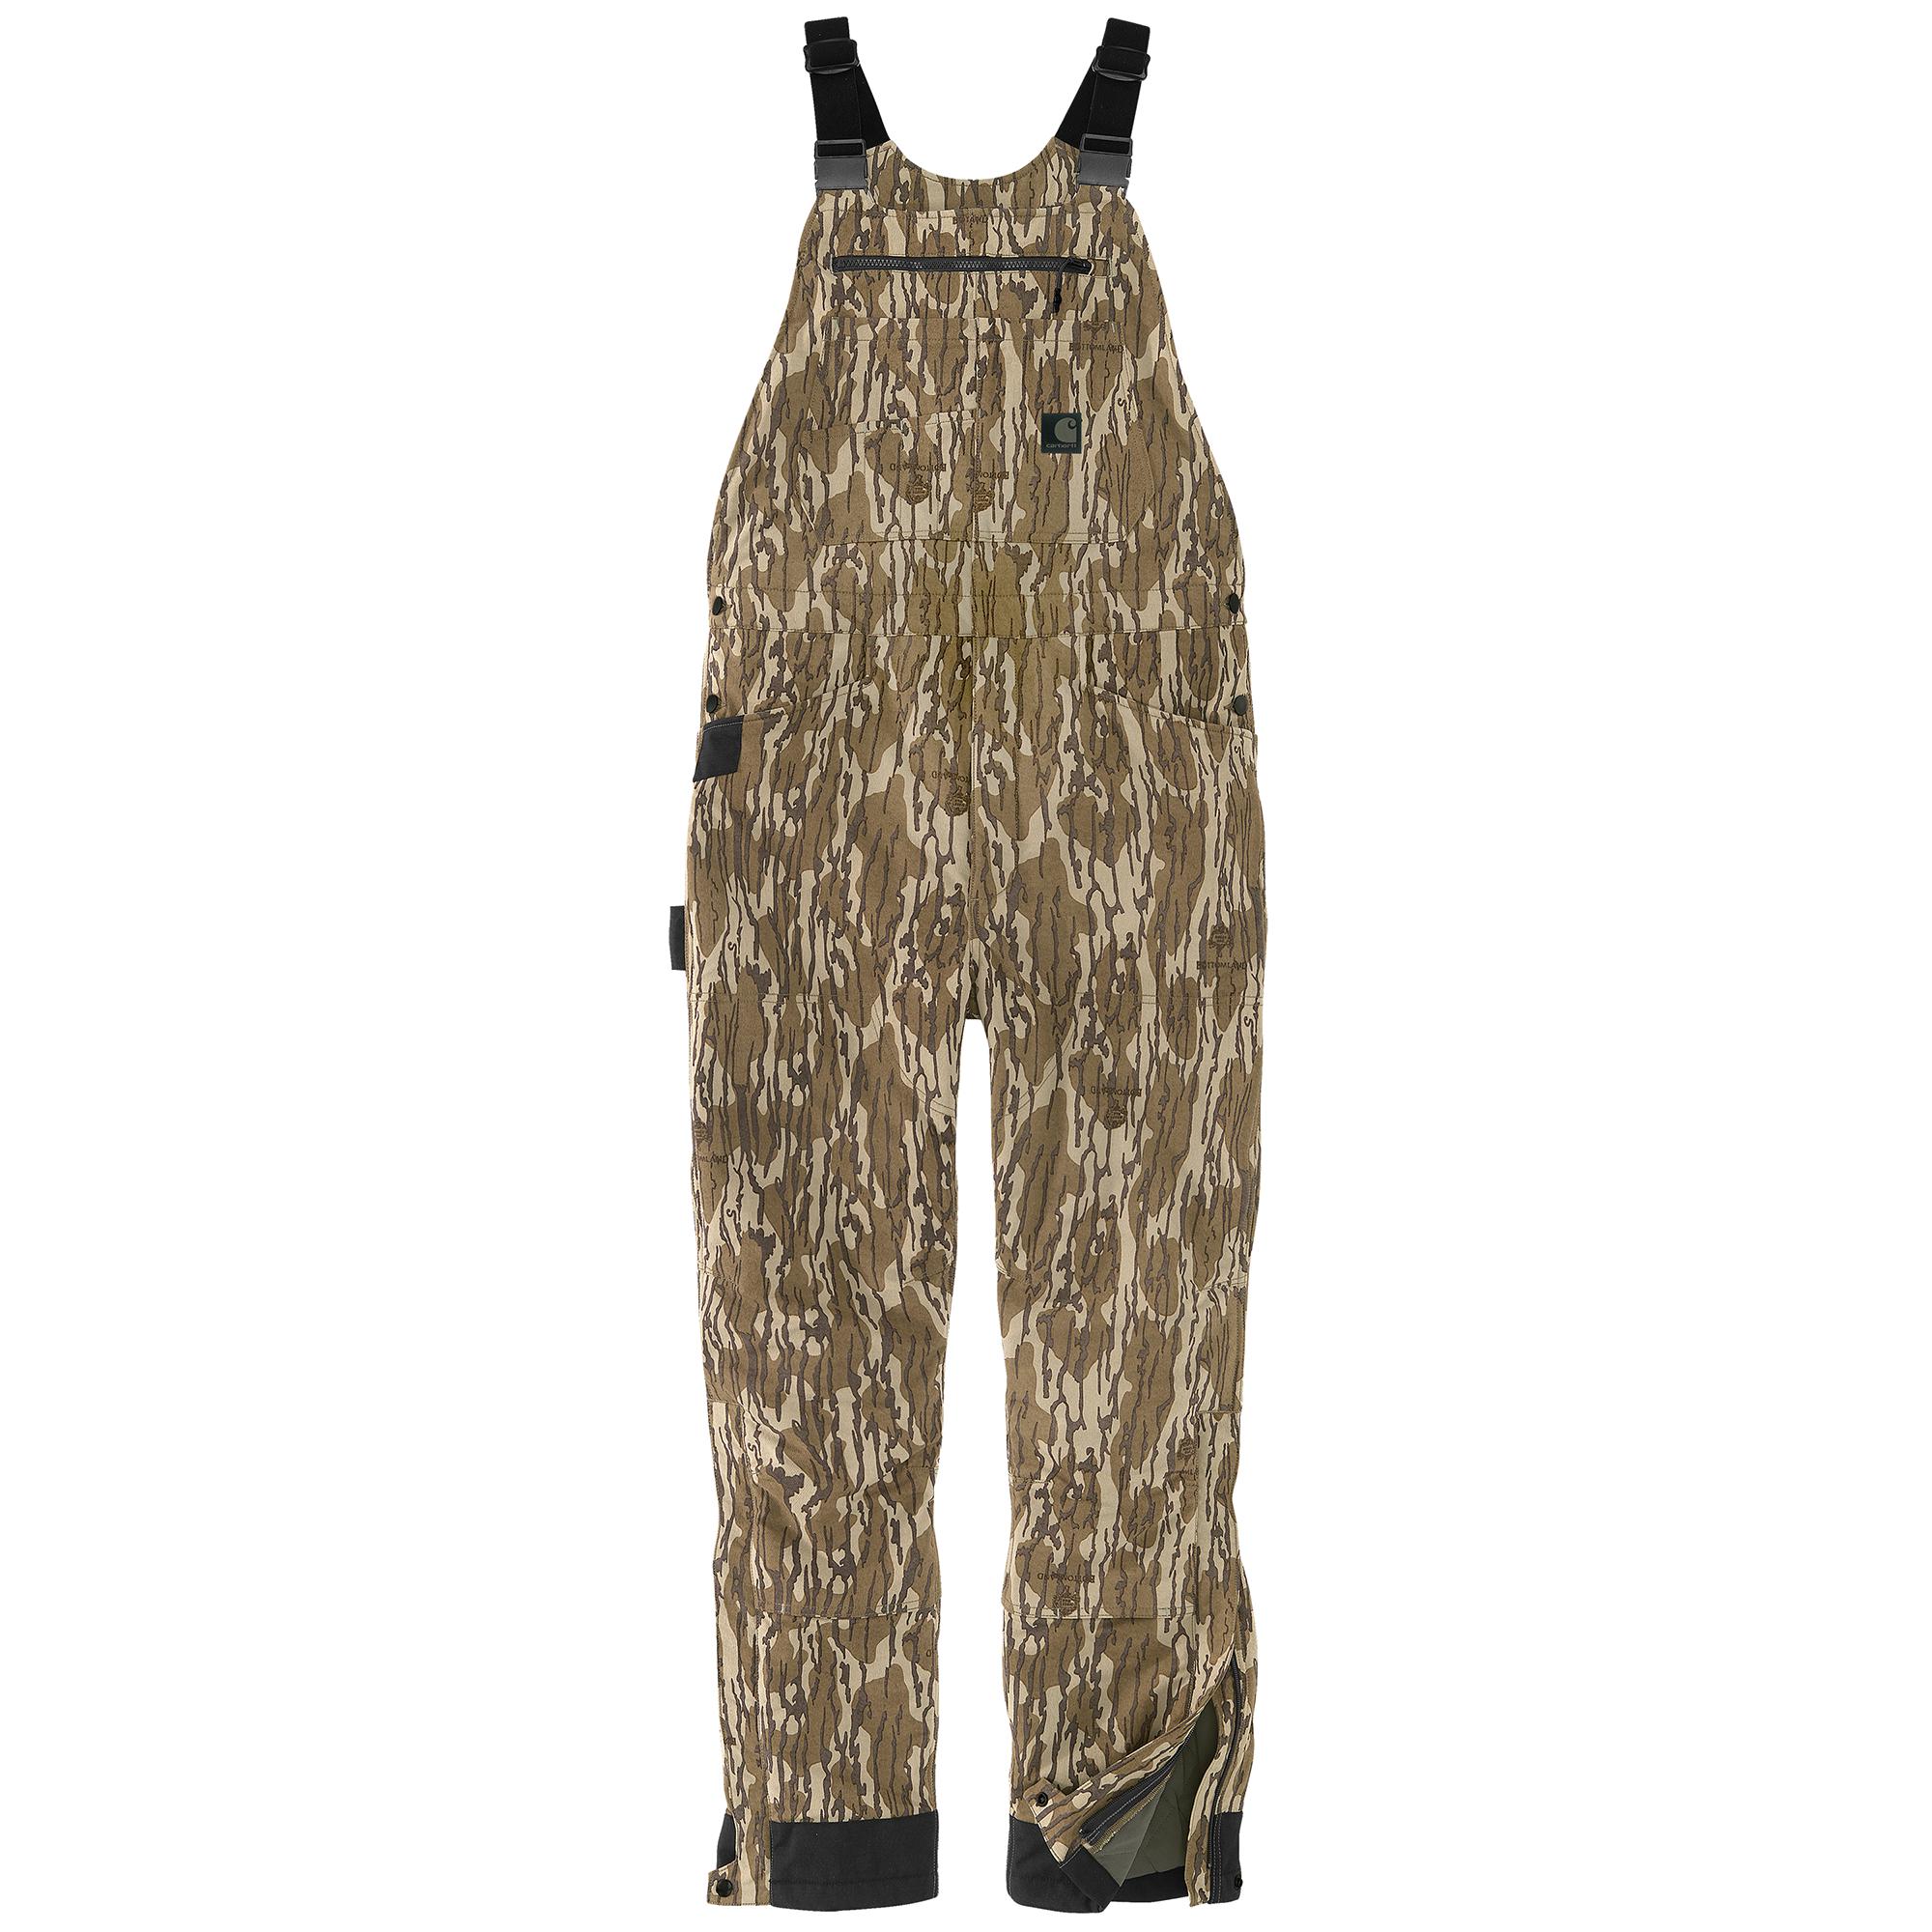 Carhartt Super Dux Relaxed Fit Insulated Camo Bib Overall